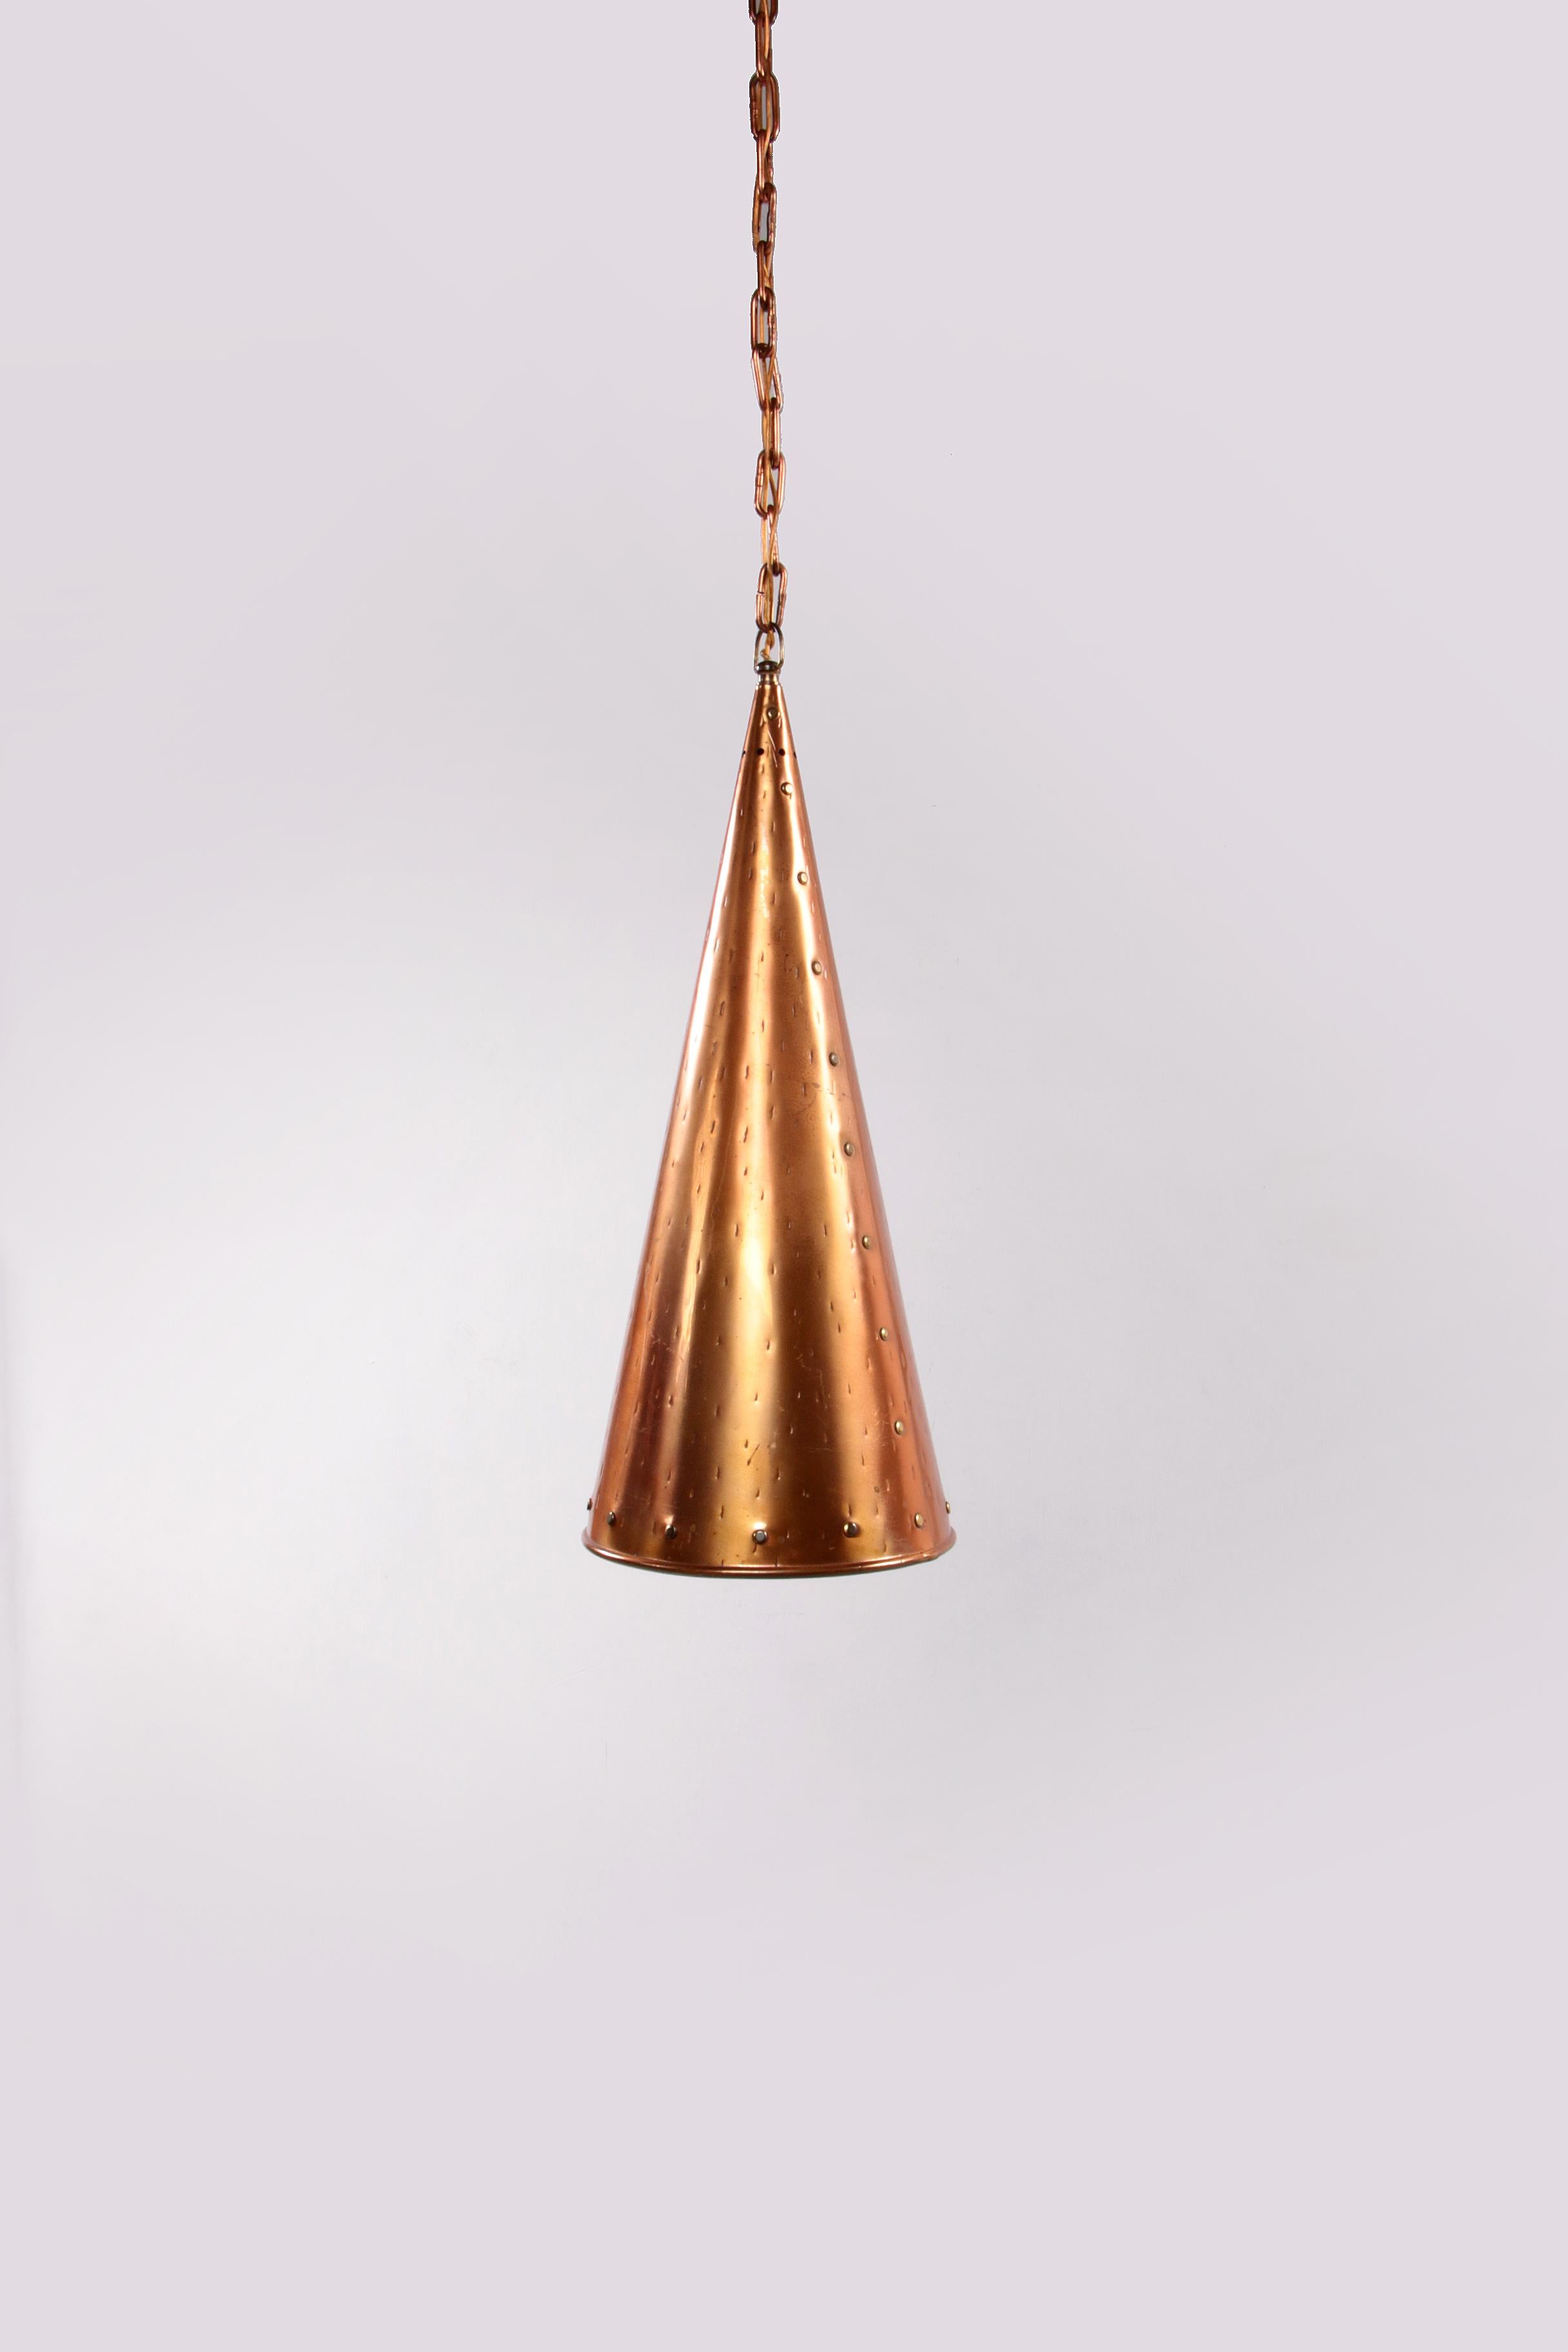 Danish hand-hammered copper hanging lamp by E.S Horn Aalestrup, 1950s


Danish hanging lamp, this lamp is hand-hammered copper by E.S Horn Aalestrup. Hand-beaten copper gives a handicraft to the hanging lamp. The cable is ''hidden'' in the metal